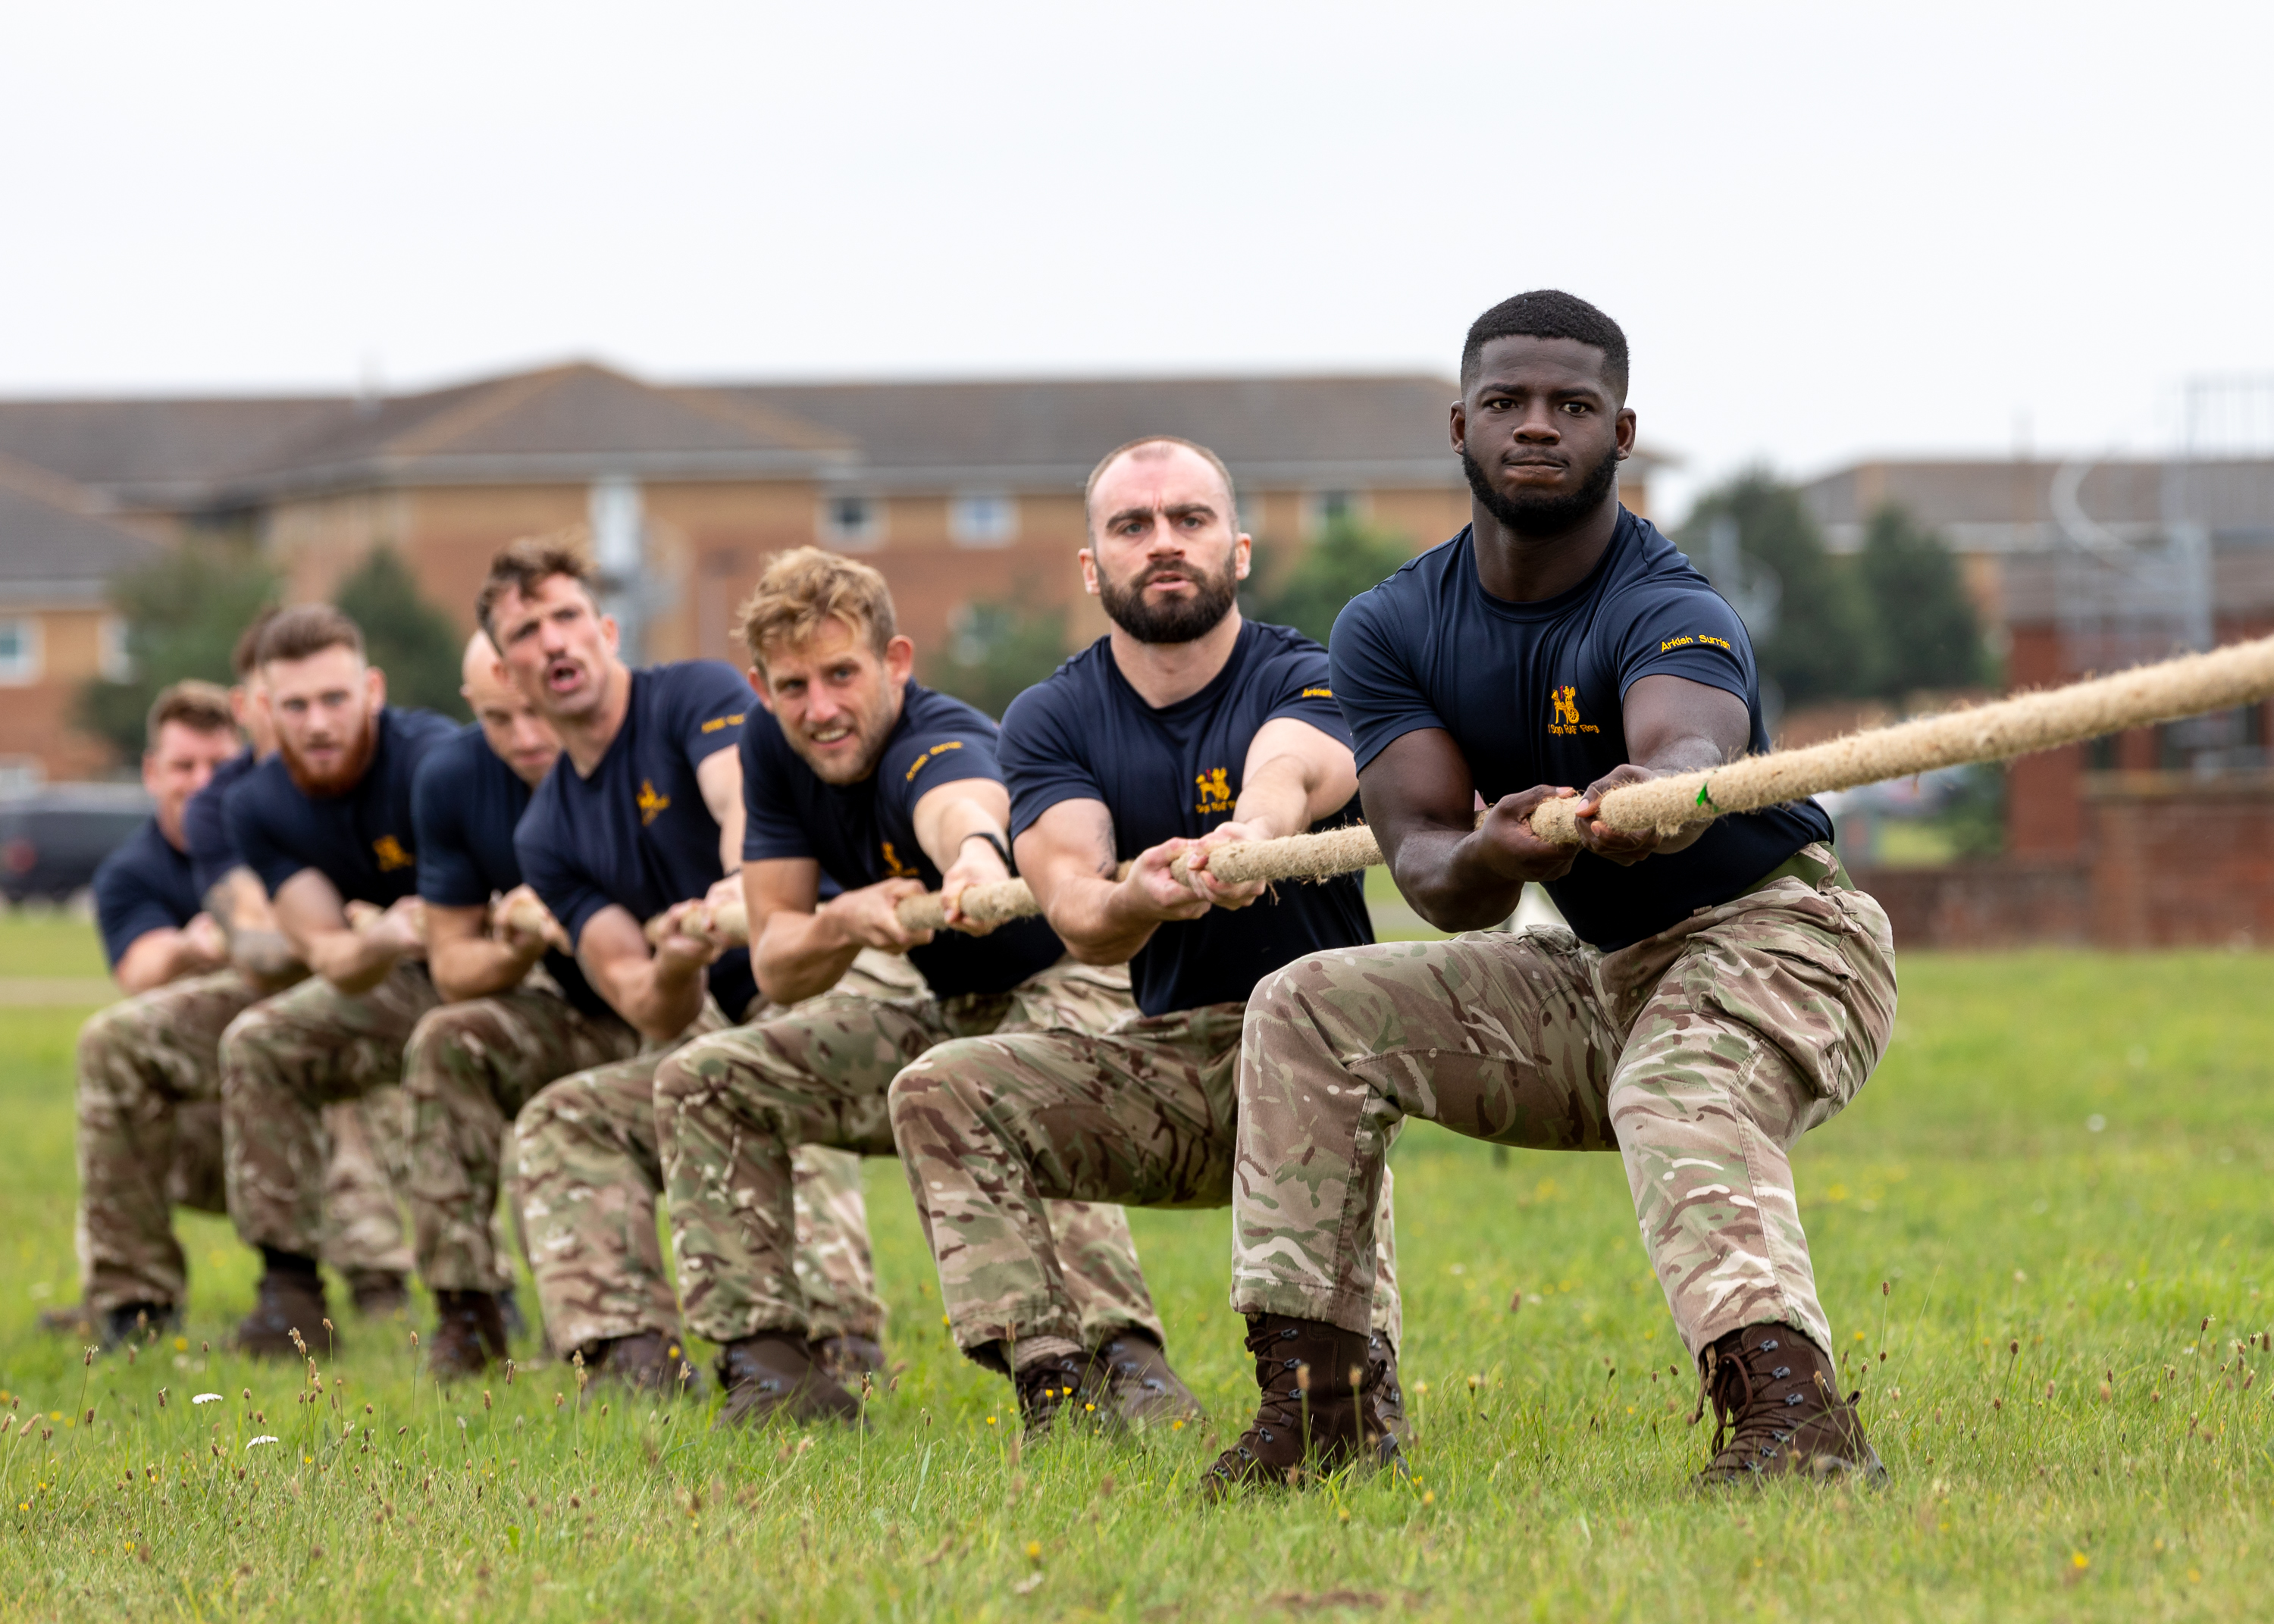 Personnel in Tug of War.